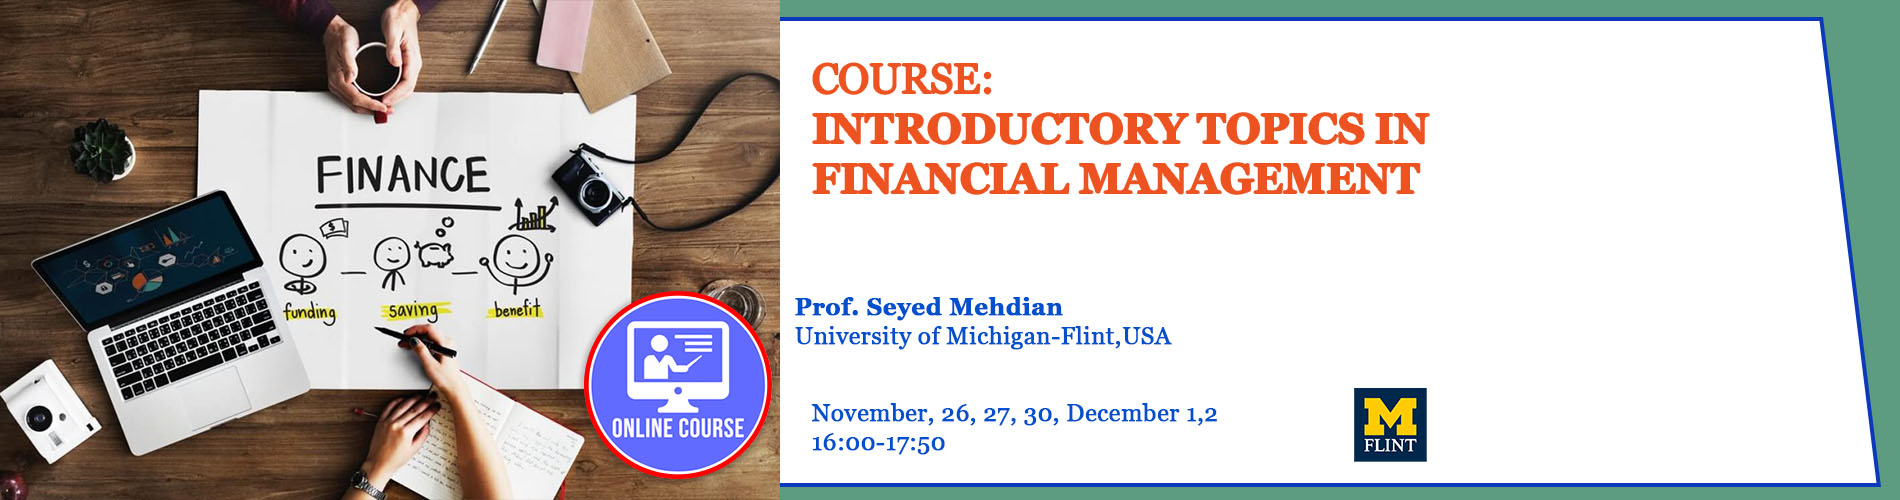 26.11.-2.12.2020-Introductory topics in financial management